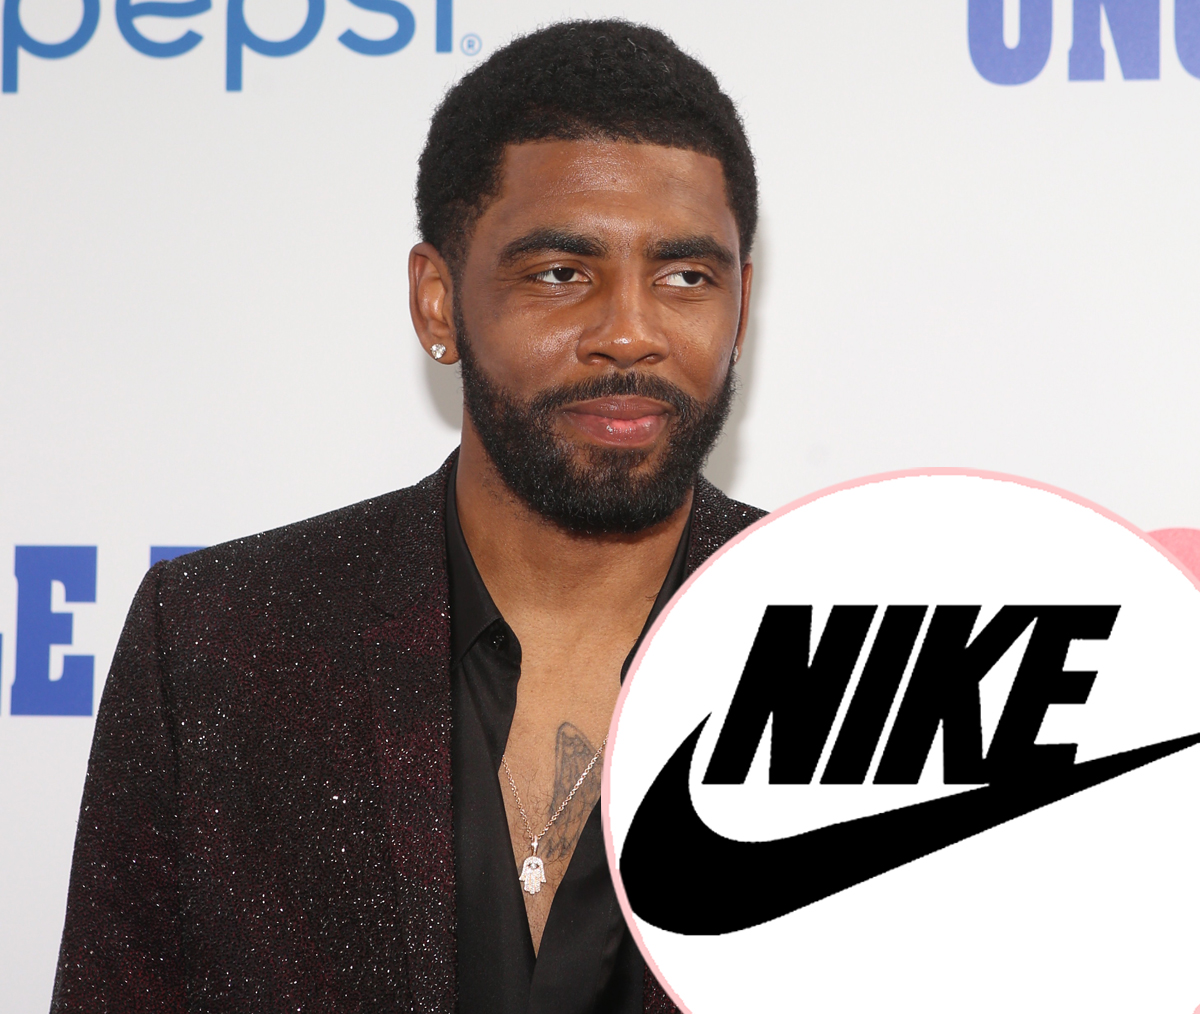 Nike Suspends Relationship With Kyrie Irving Amid Antisemitism Fallout!